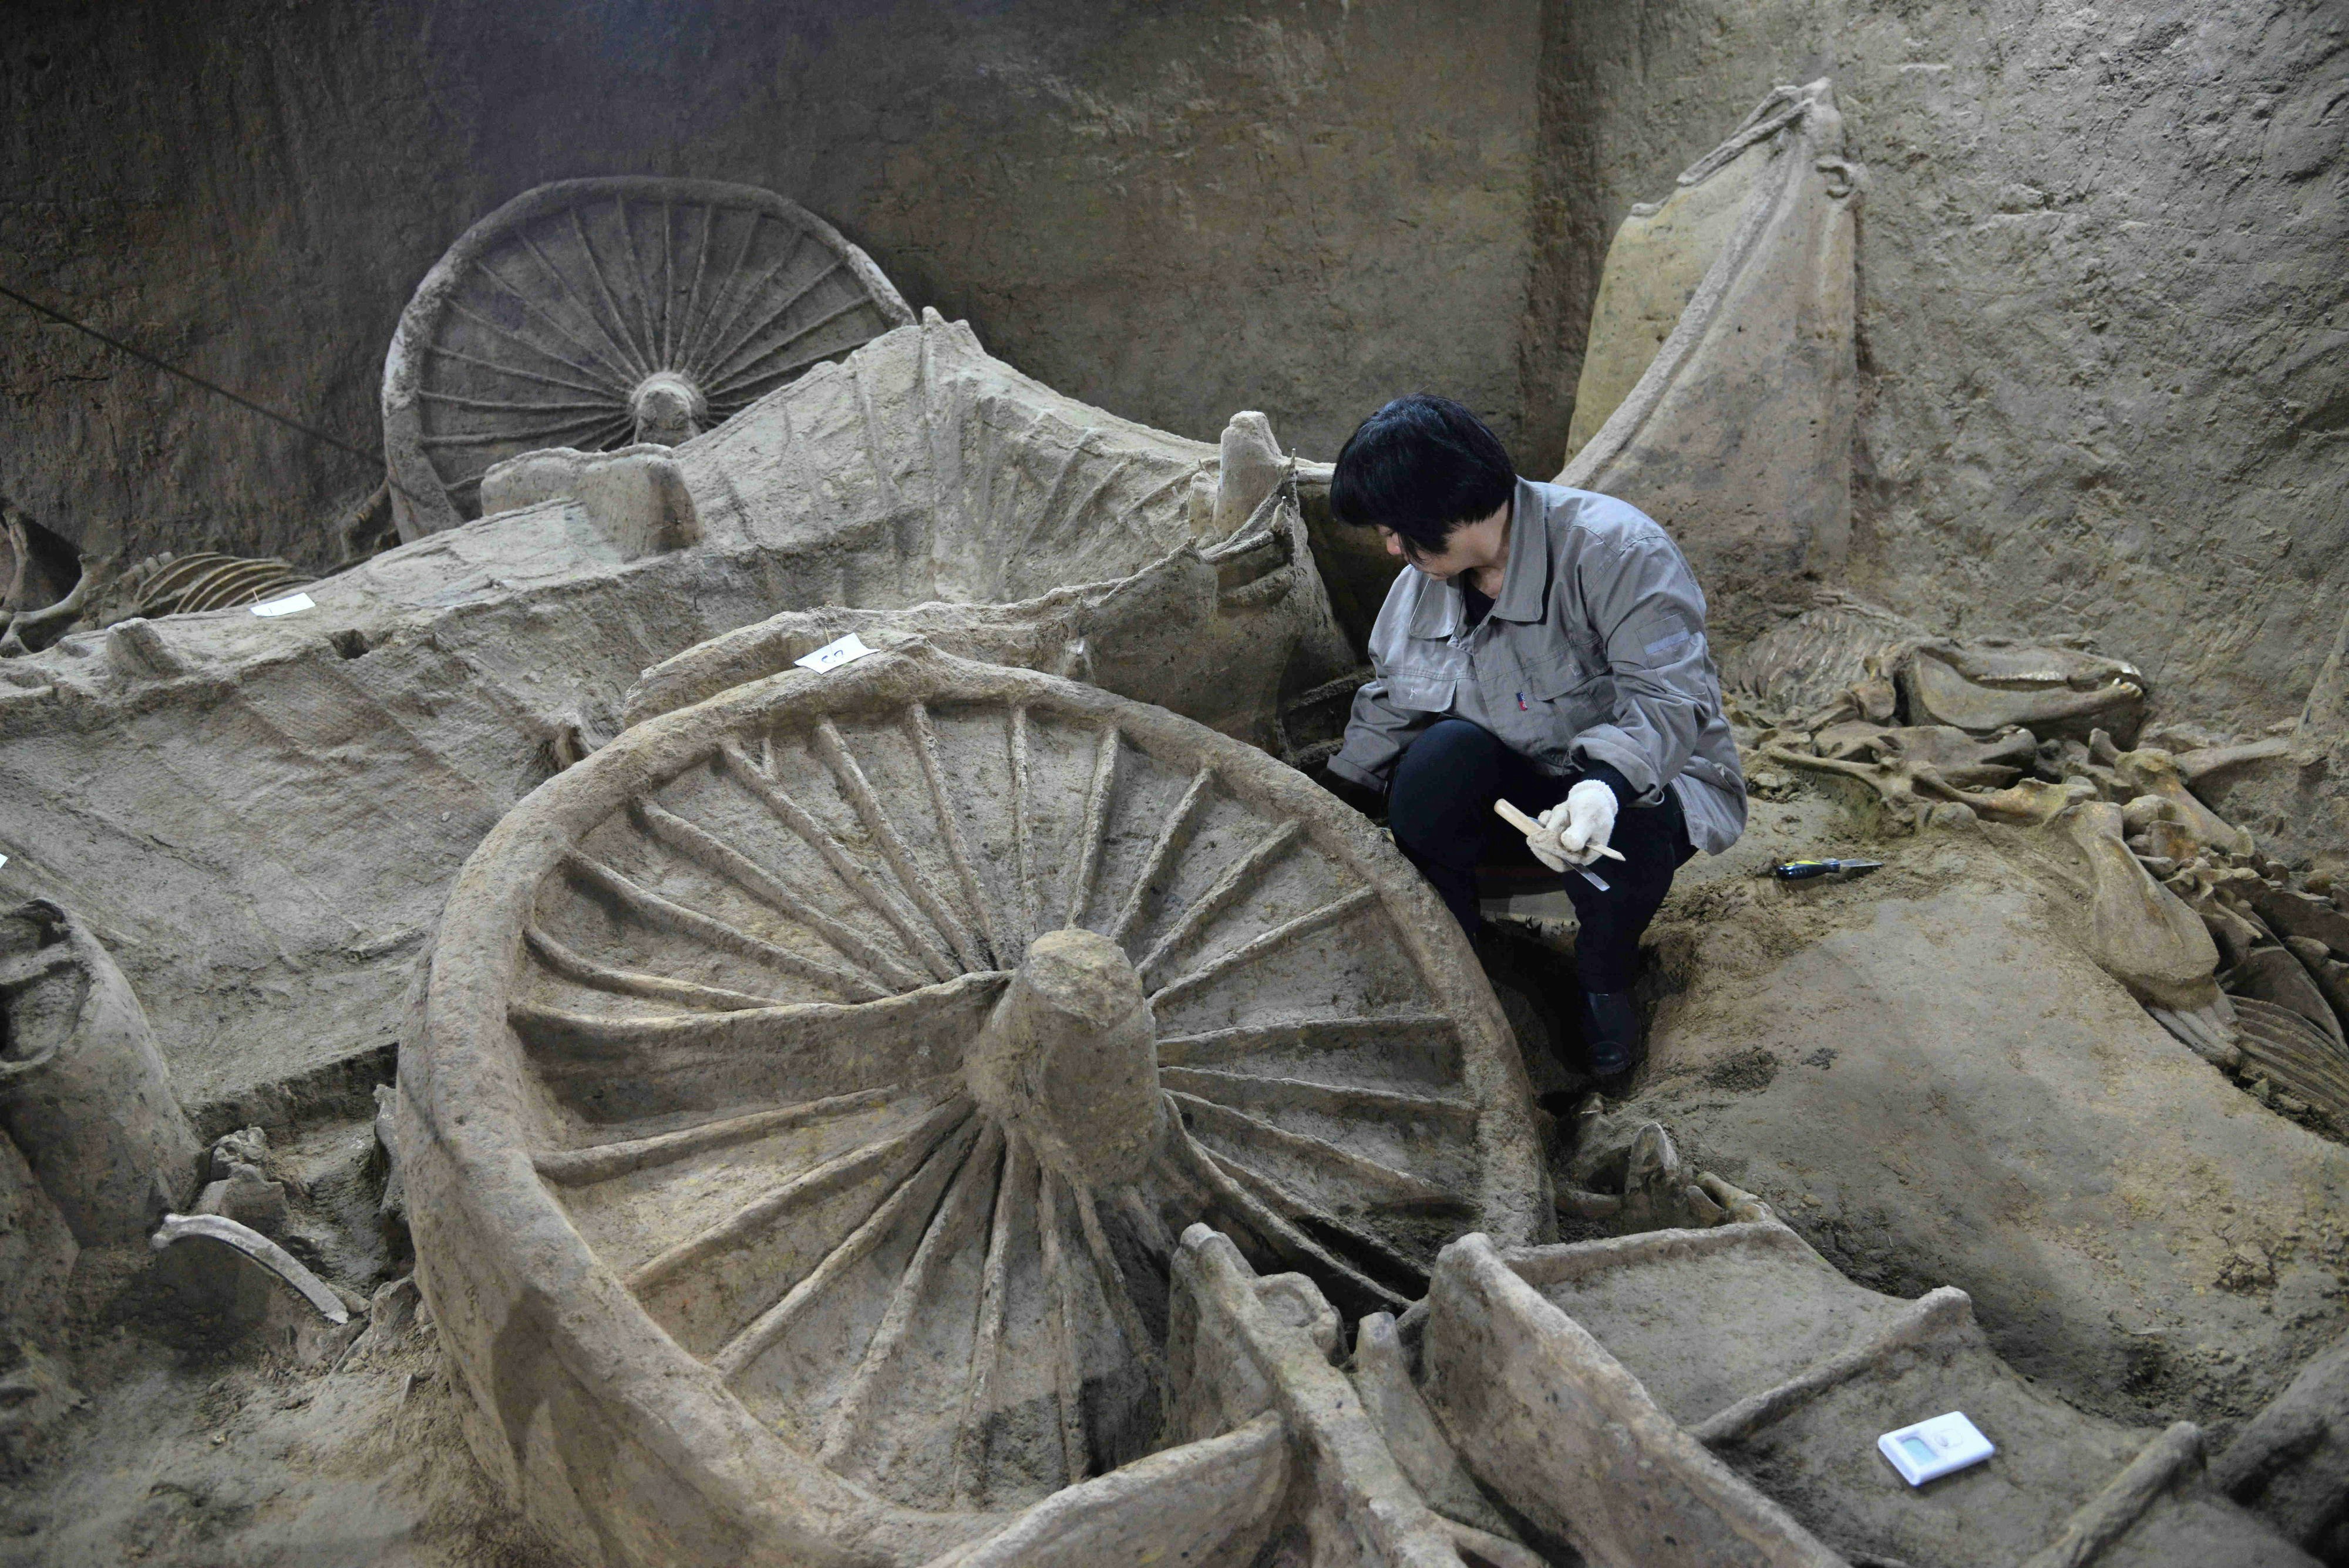 Dig unveils ancient chariots and horse skeletons